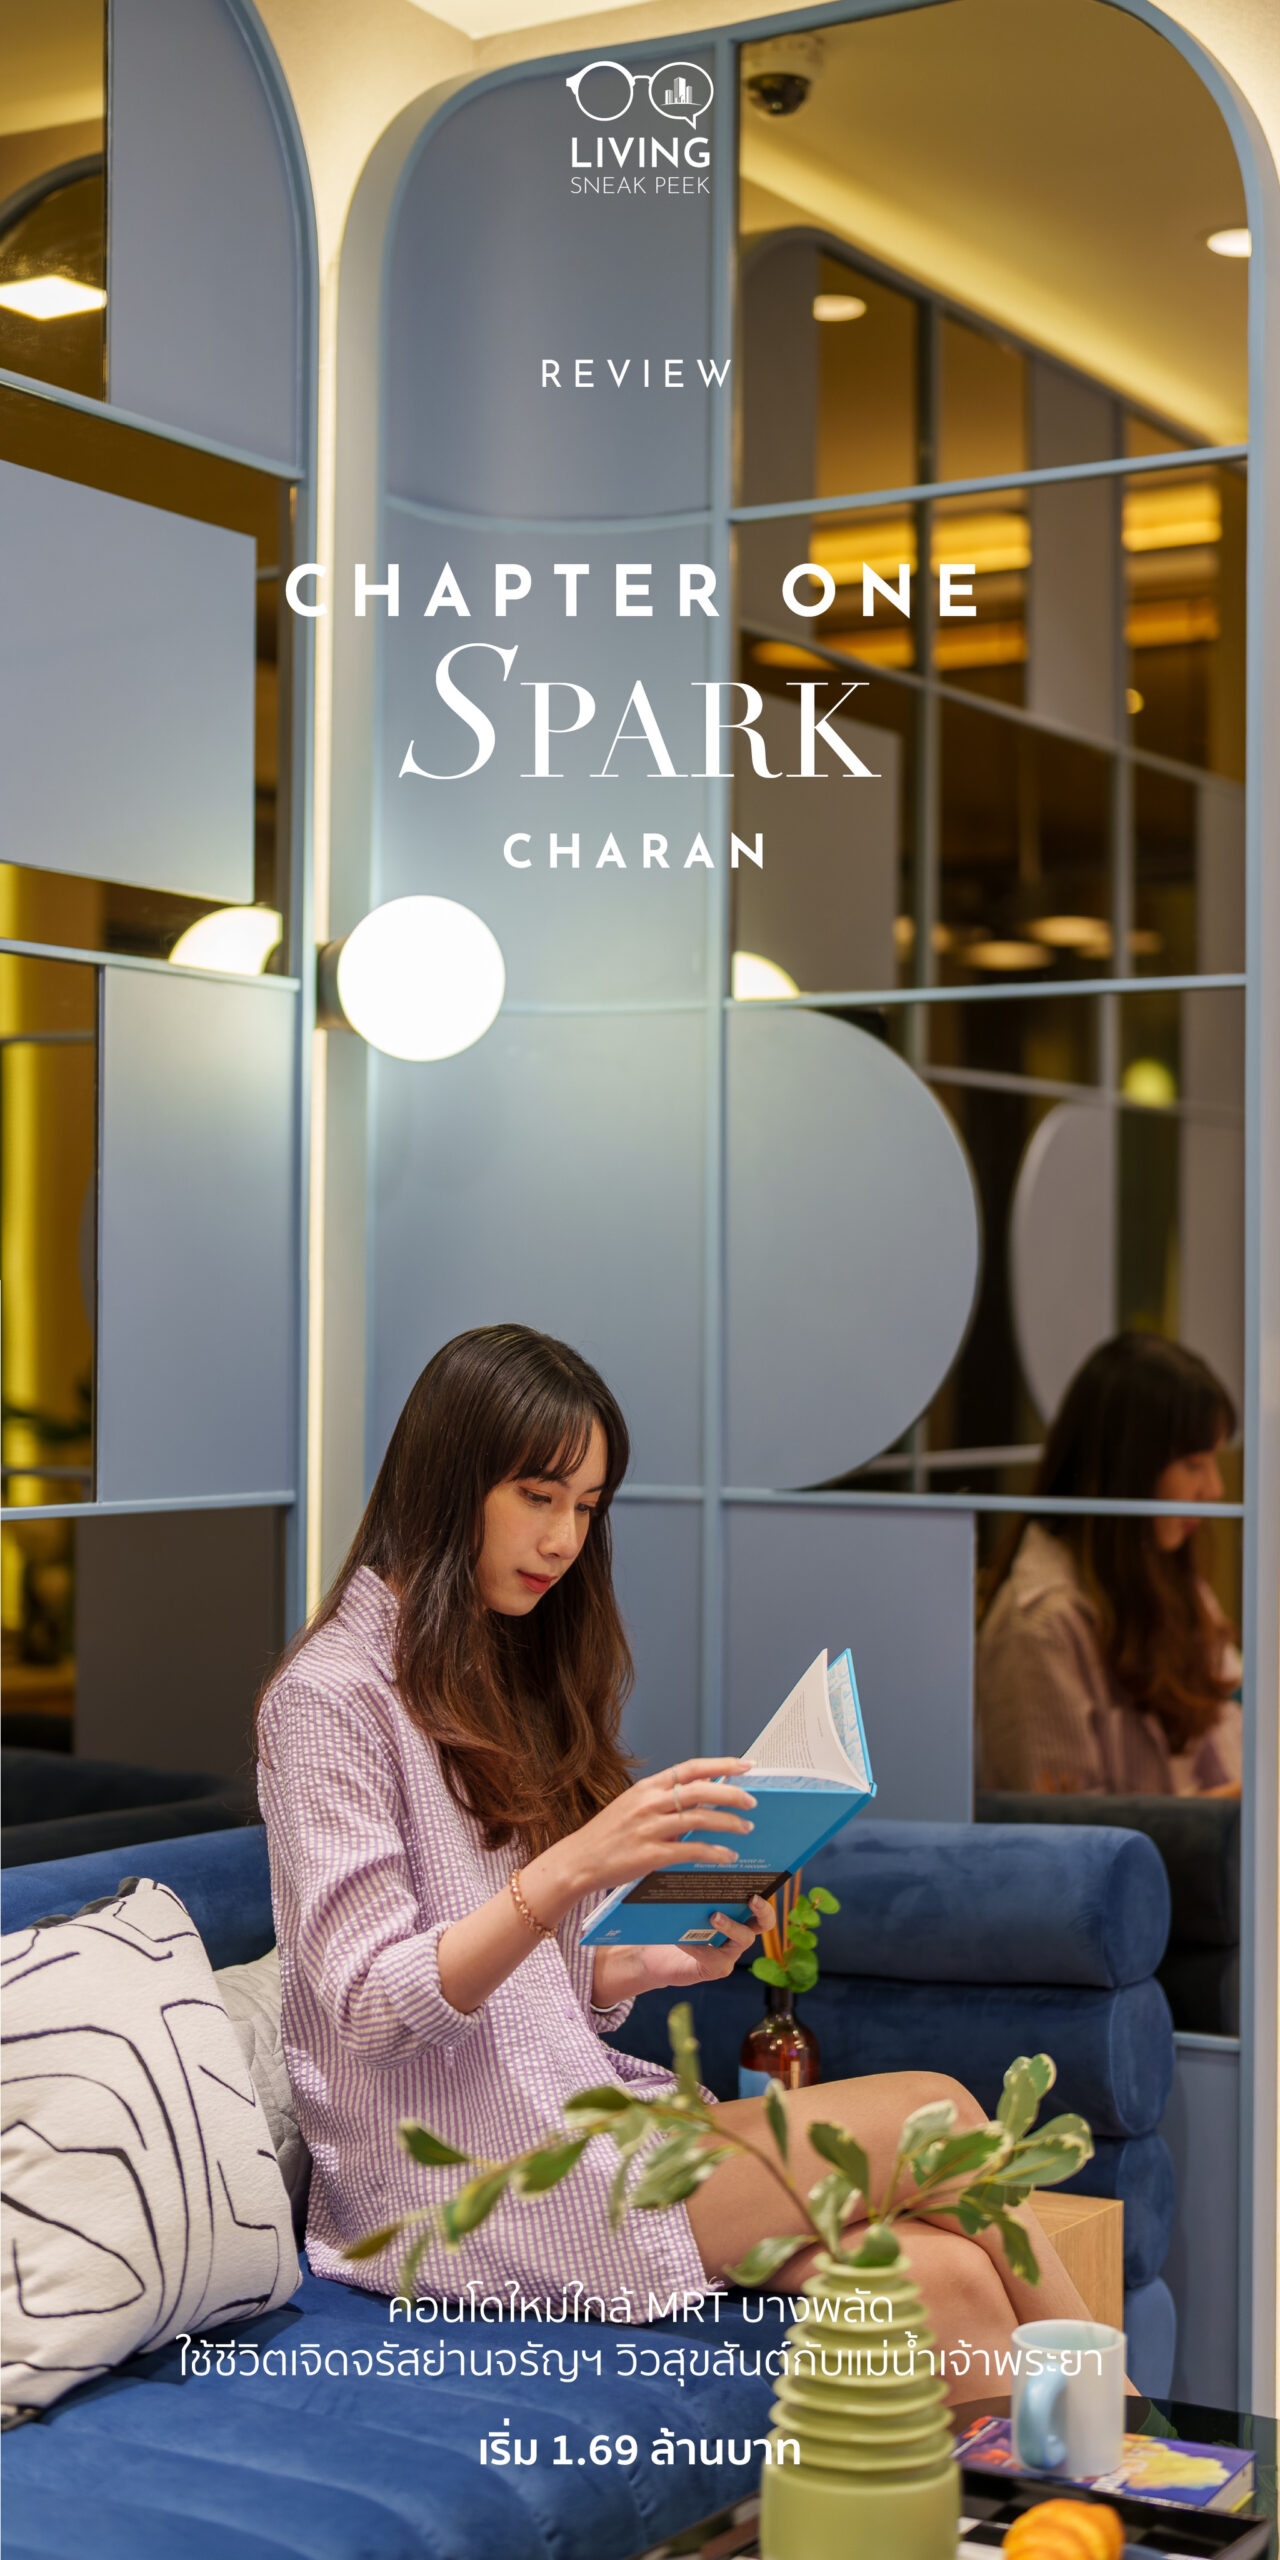 Chapter One Spark Charan